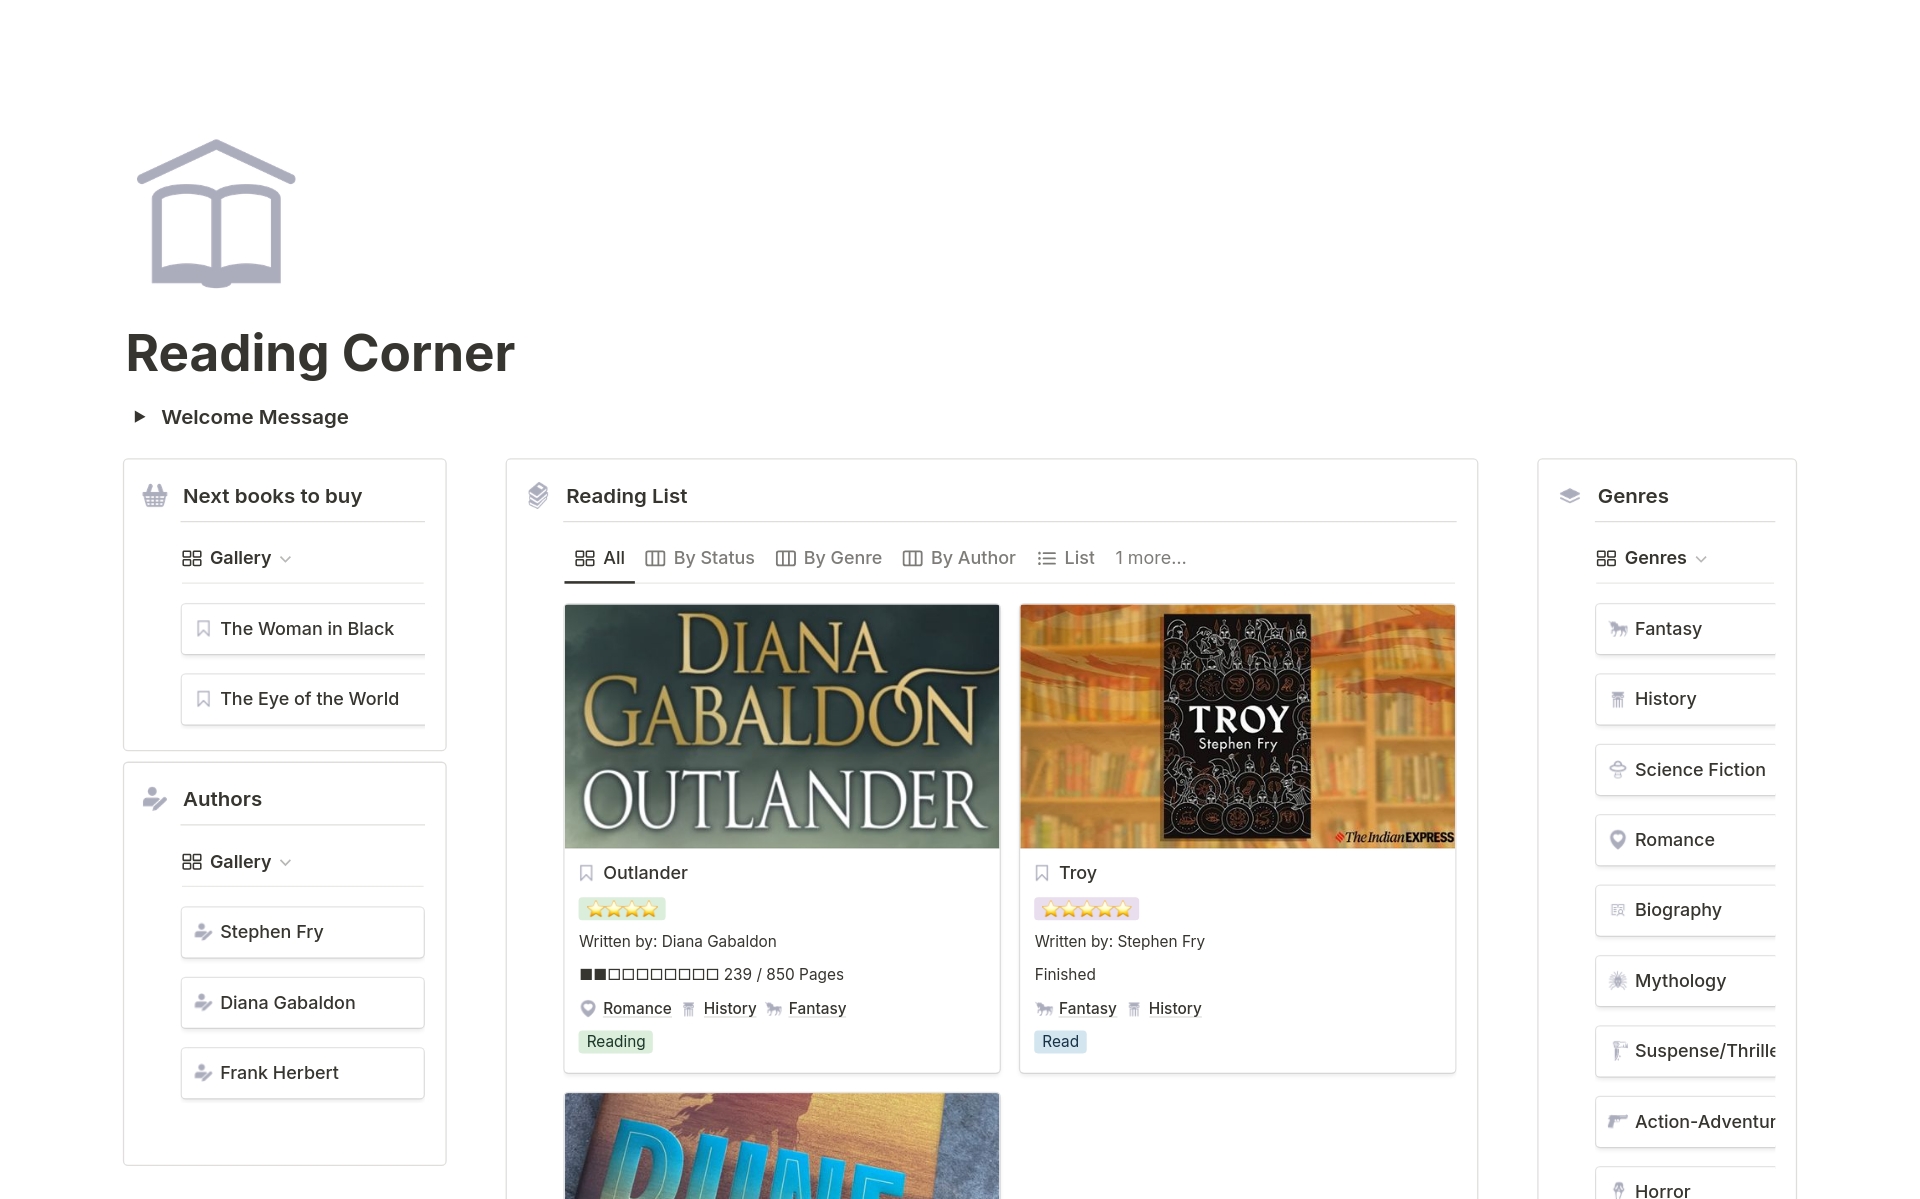 What you can do:

Add new Books

Categorize them by Genre and Author

Track your Reading Progress

Add Details Like Rating, Status, Genre, Author

Create a Beautiful Library of Your Favorite Books